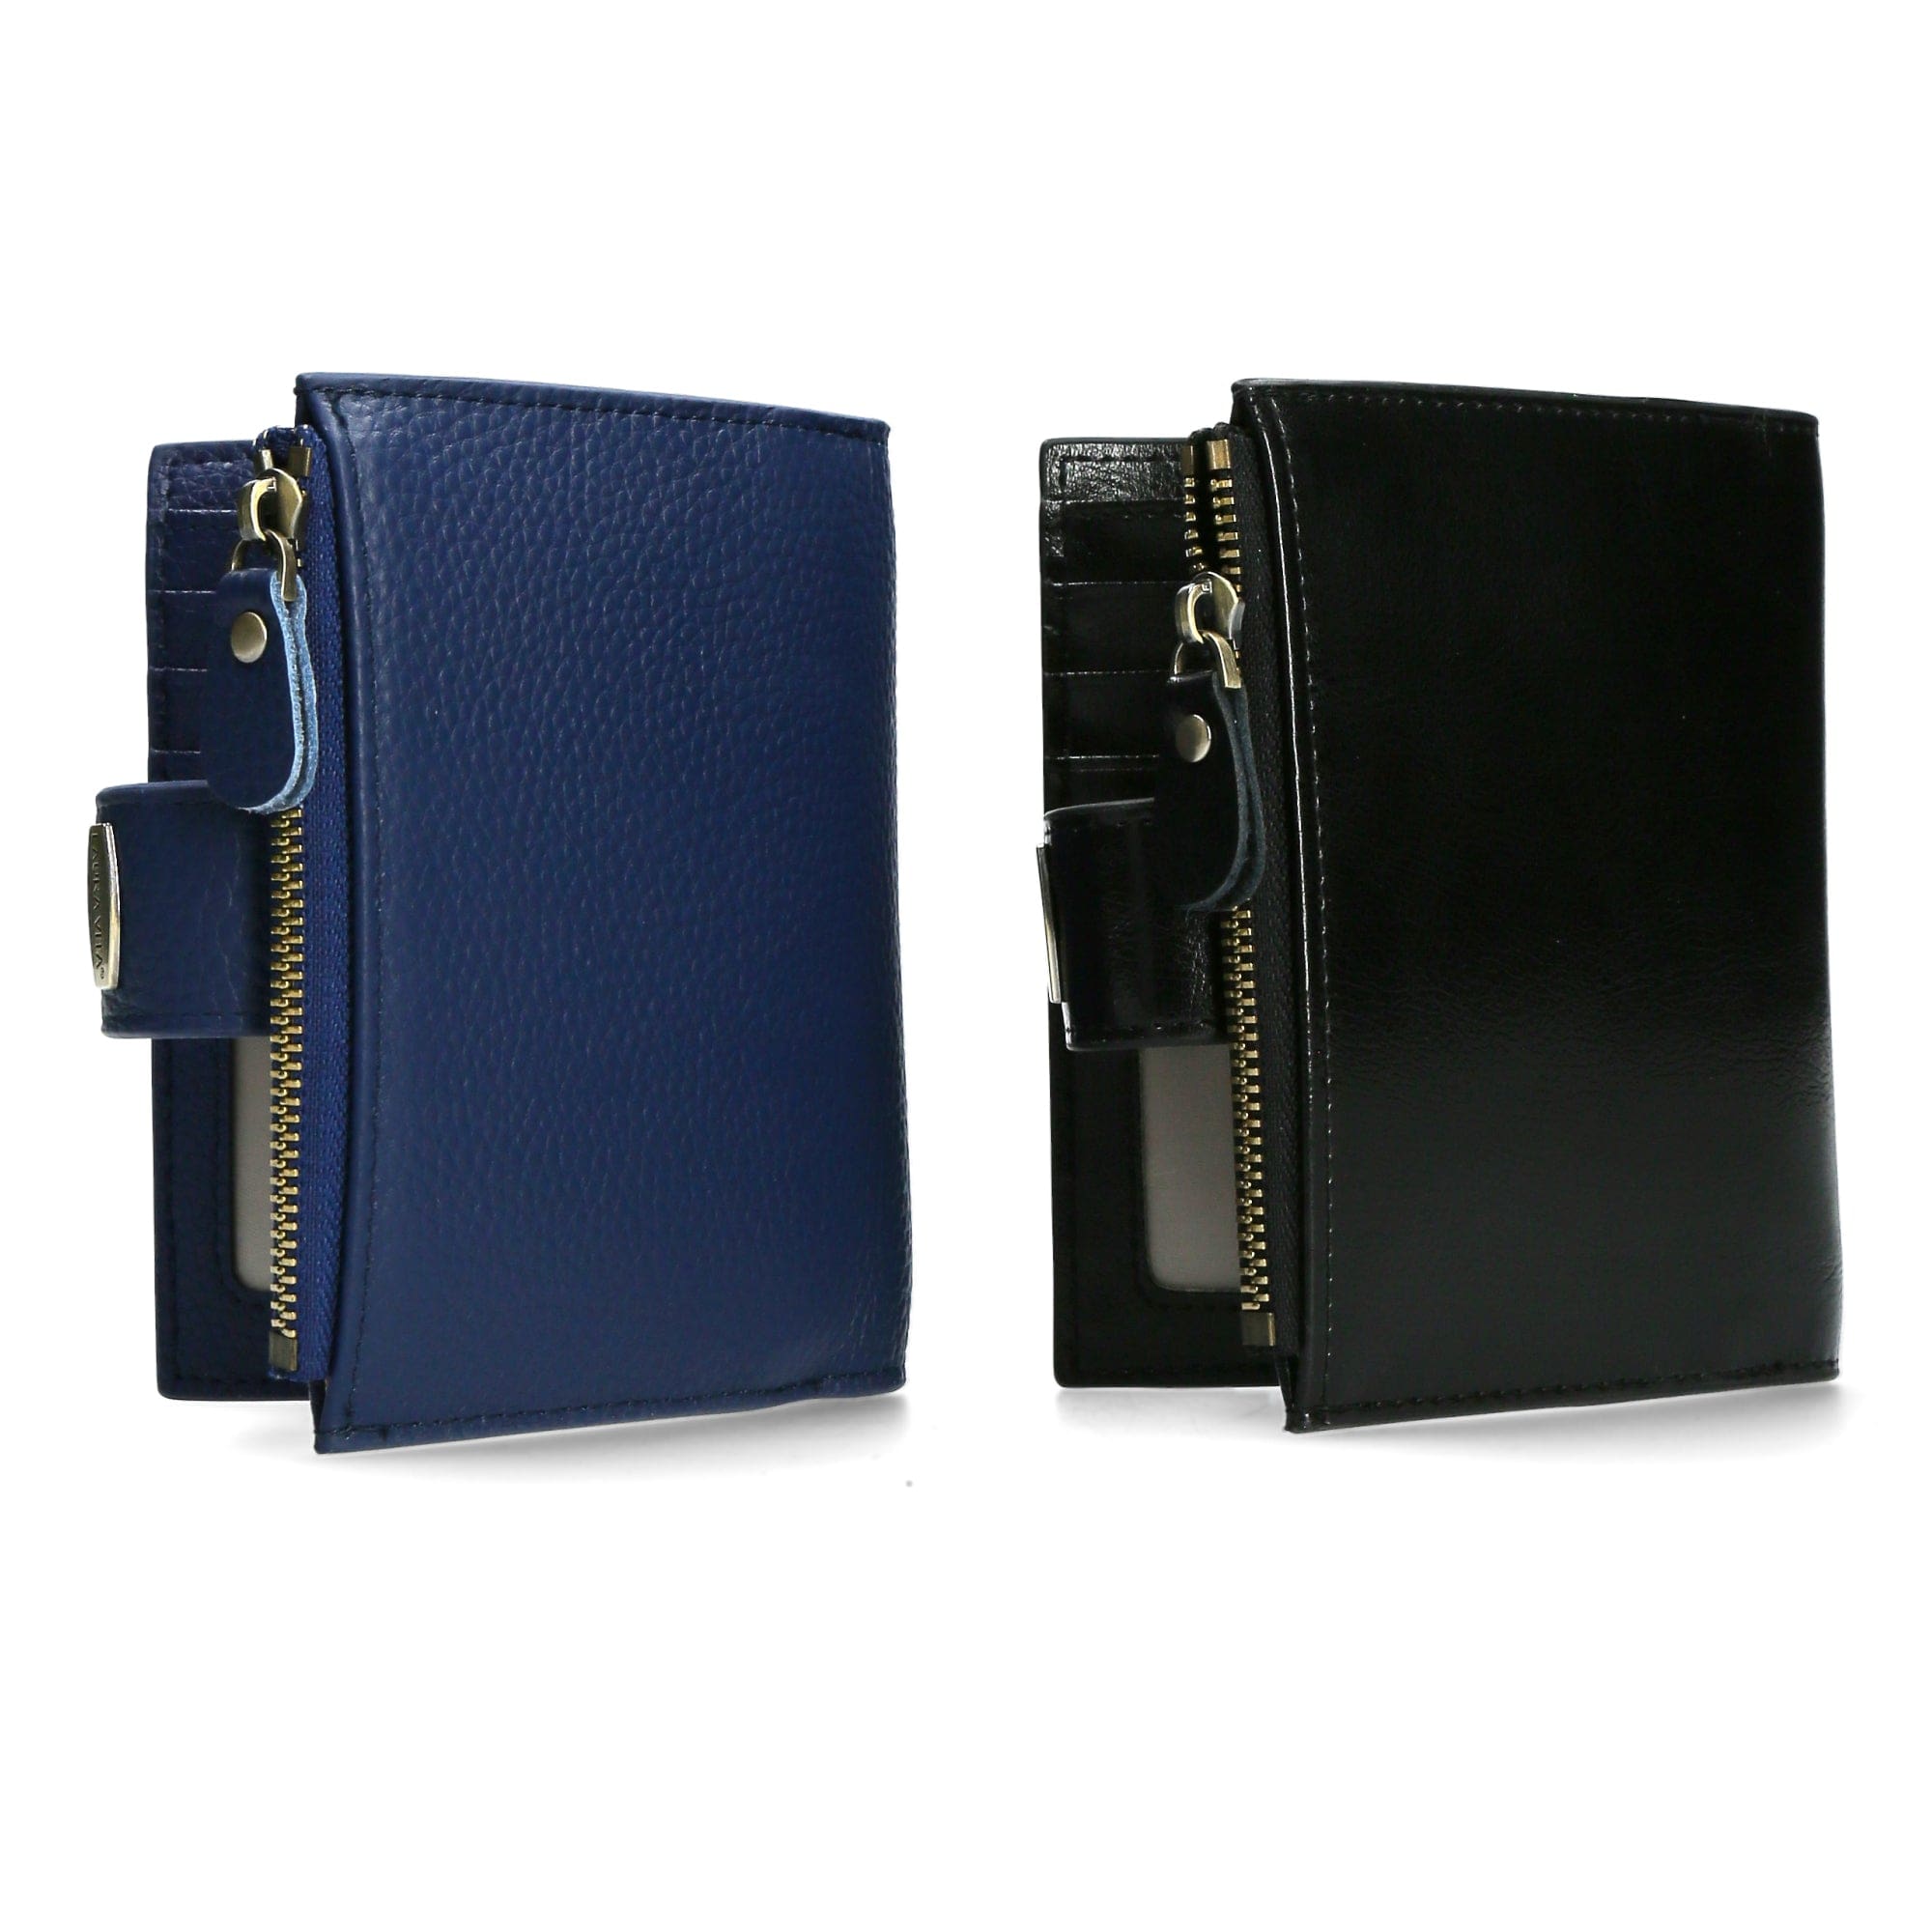 Felicia wallet - Small leather goods